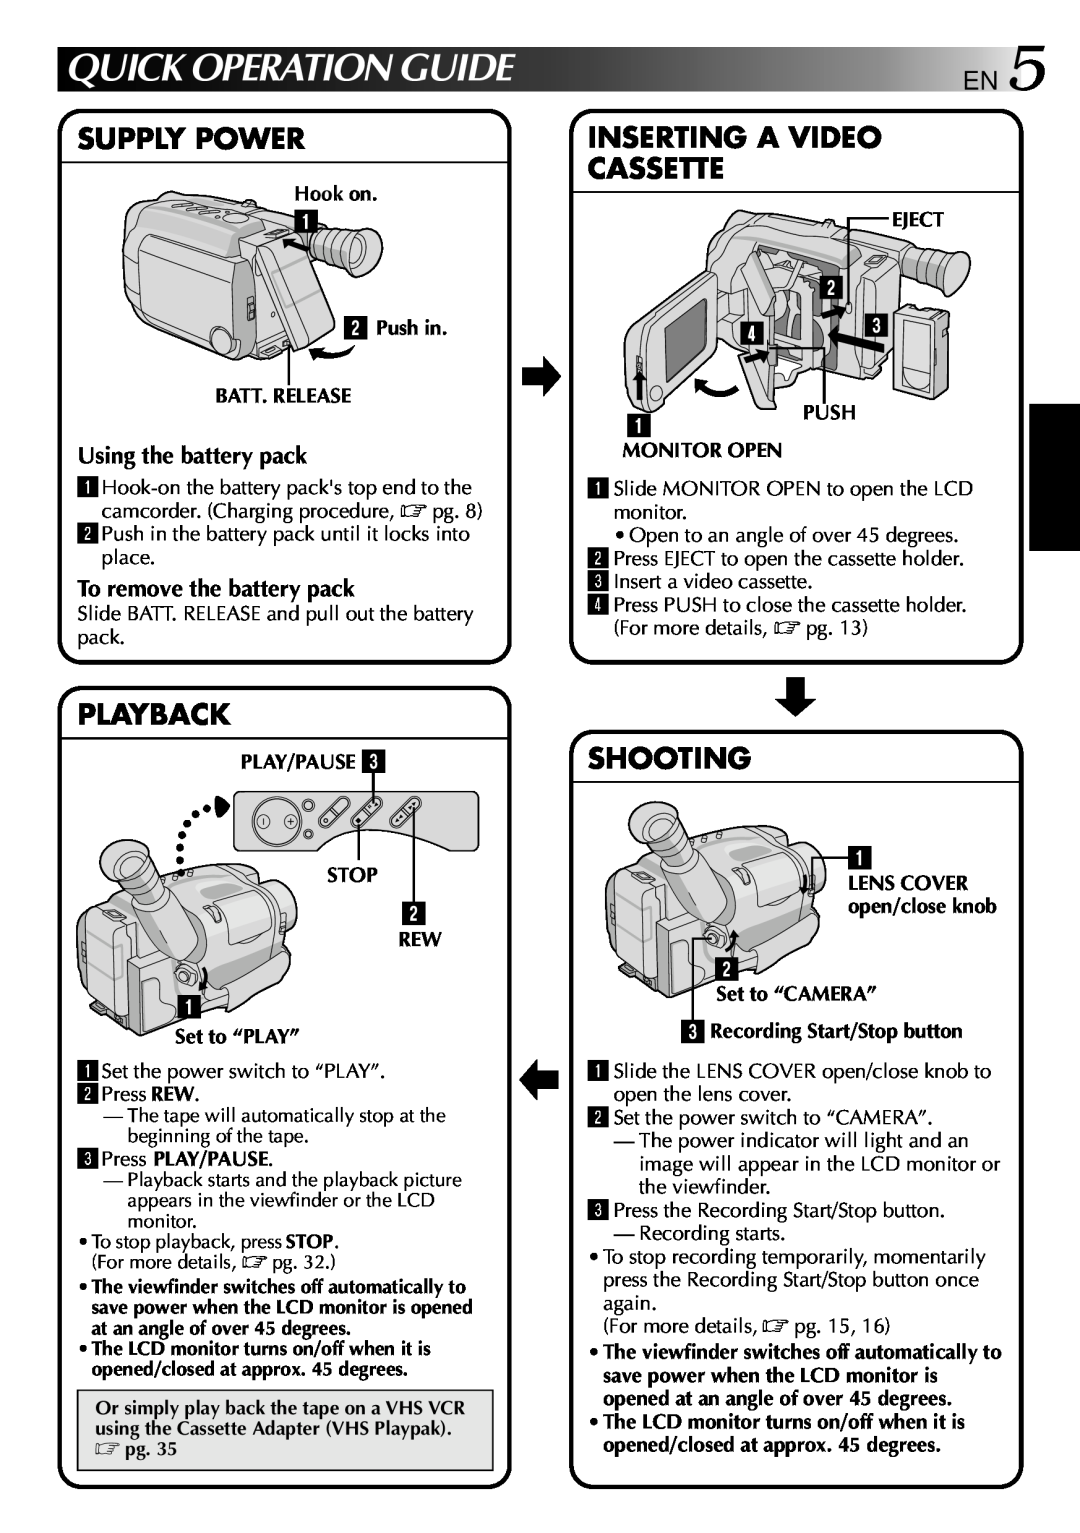 JVC GR-AXM22UM Quick Operation Guide, Supply Power, Inserting A Video Cassette, Playback, Shooting, Using the battery pack 